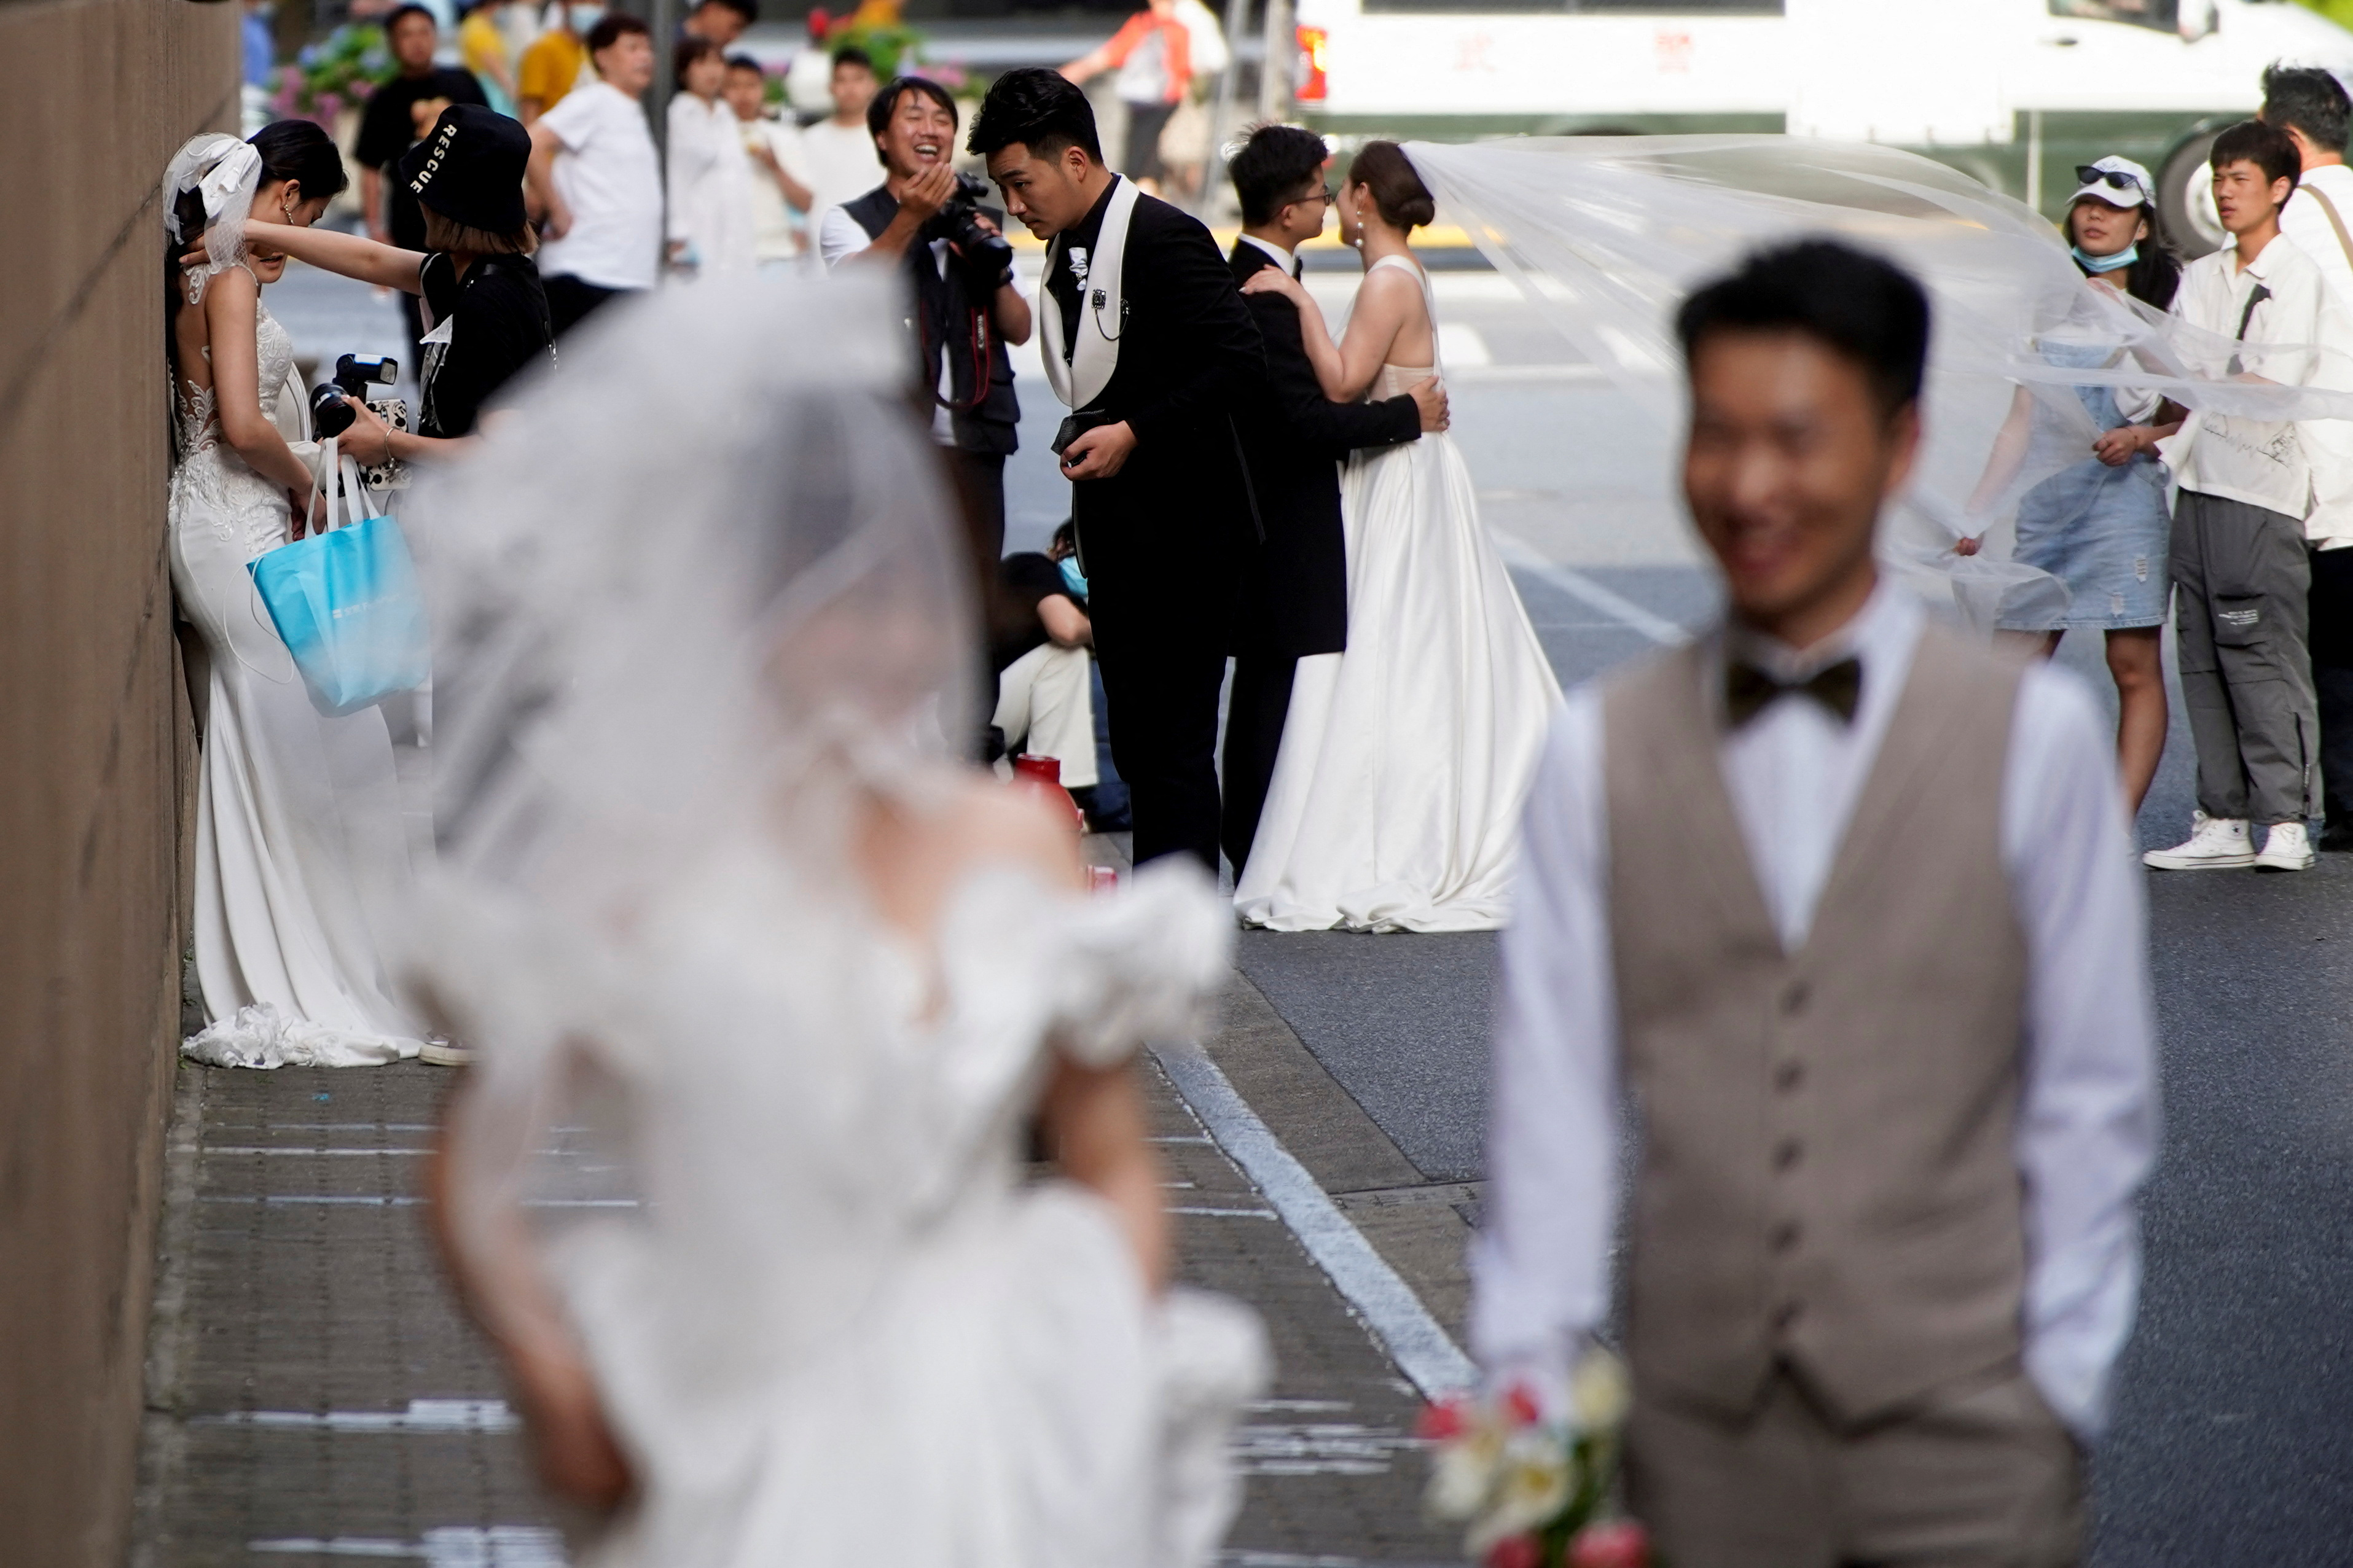 Couples prepare to get their photo taken during a wedding photography shoot, amid the coronavirus disease pandemic, in Shanghai